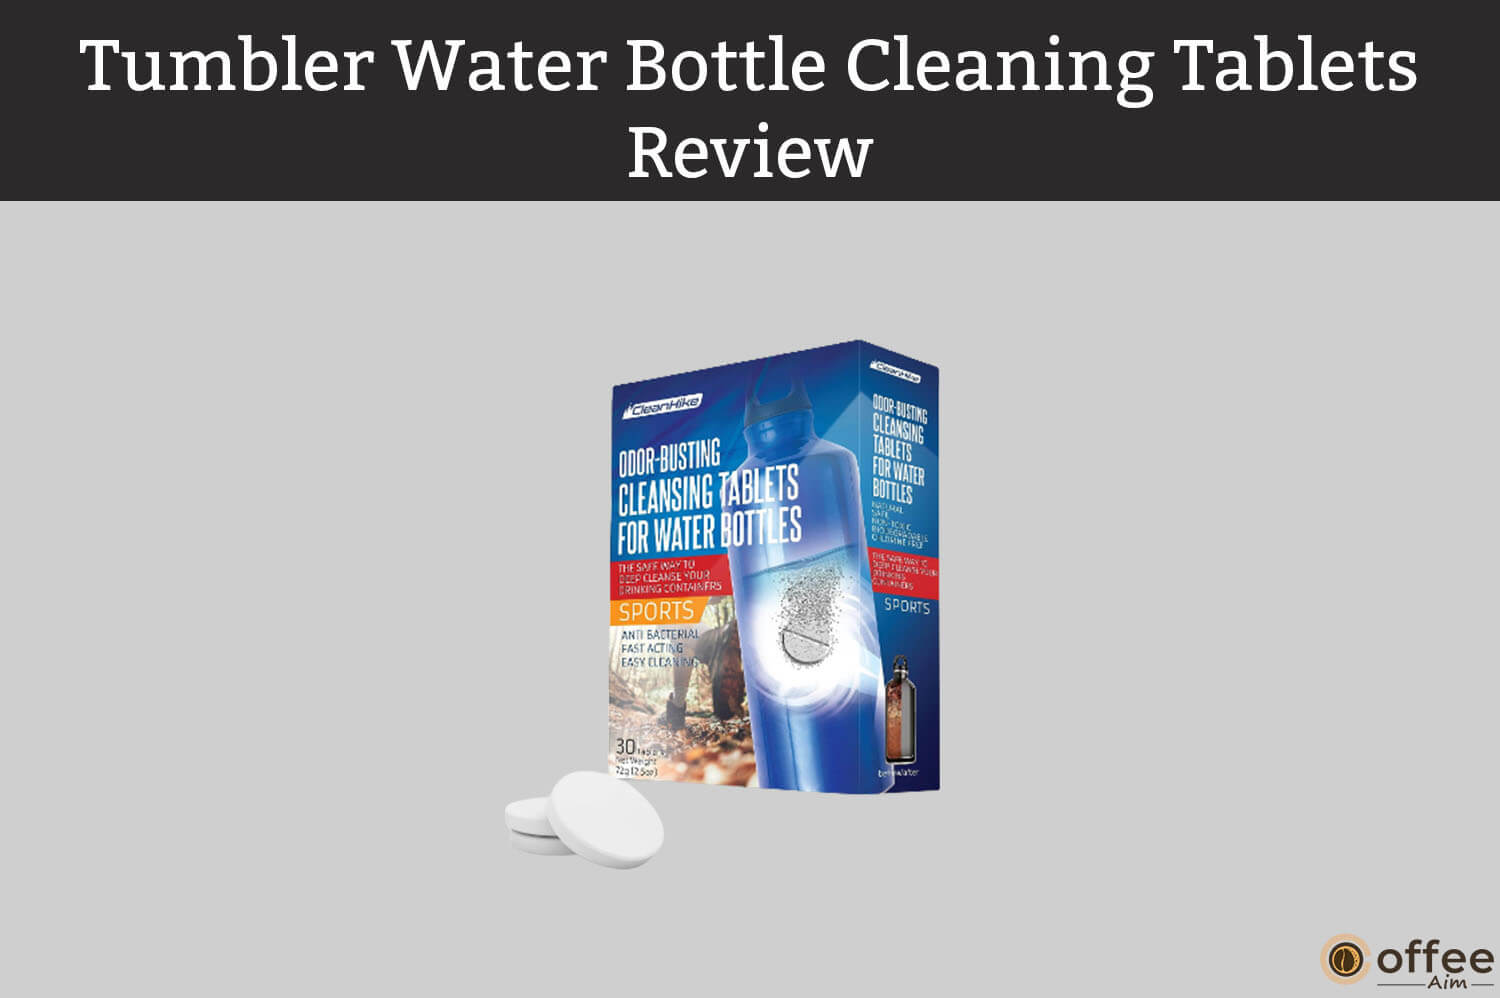 Featured image for the article "Tumbler Water Bottle Cleaning Tablets Review"